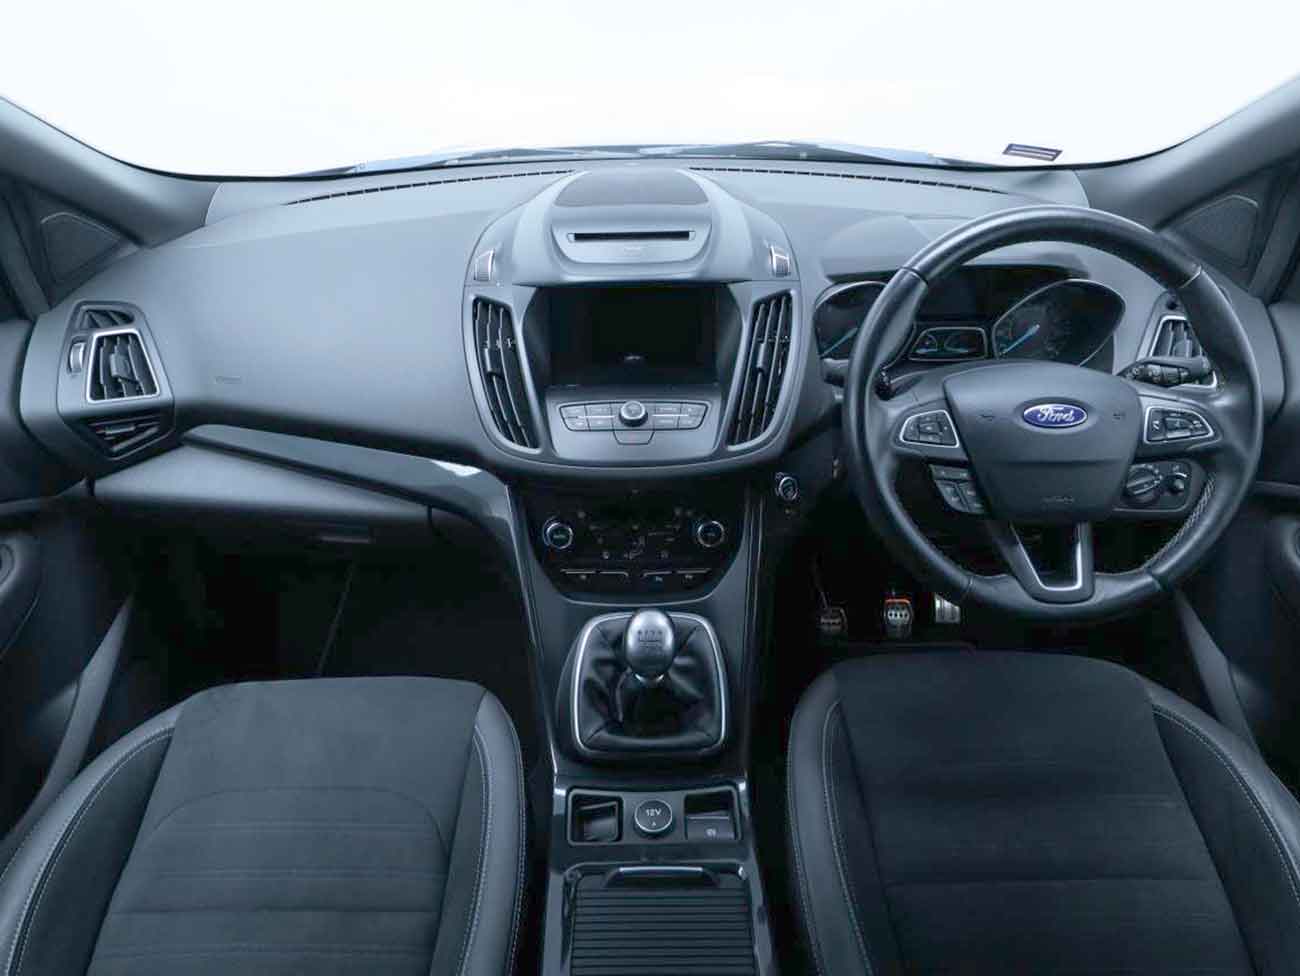 Image of the interior of Ford Kuga